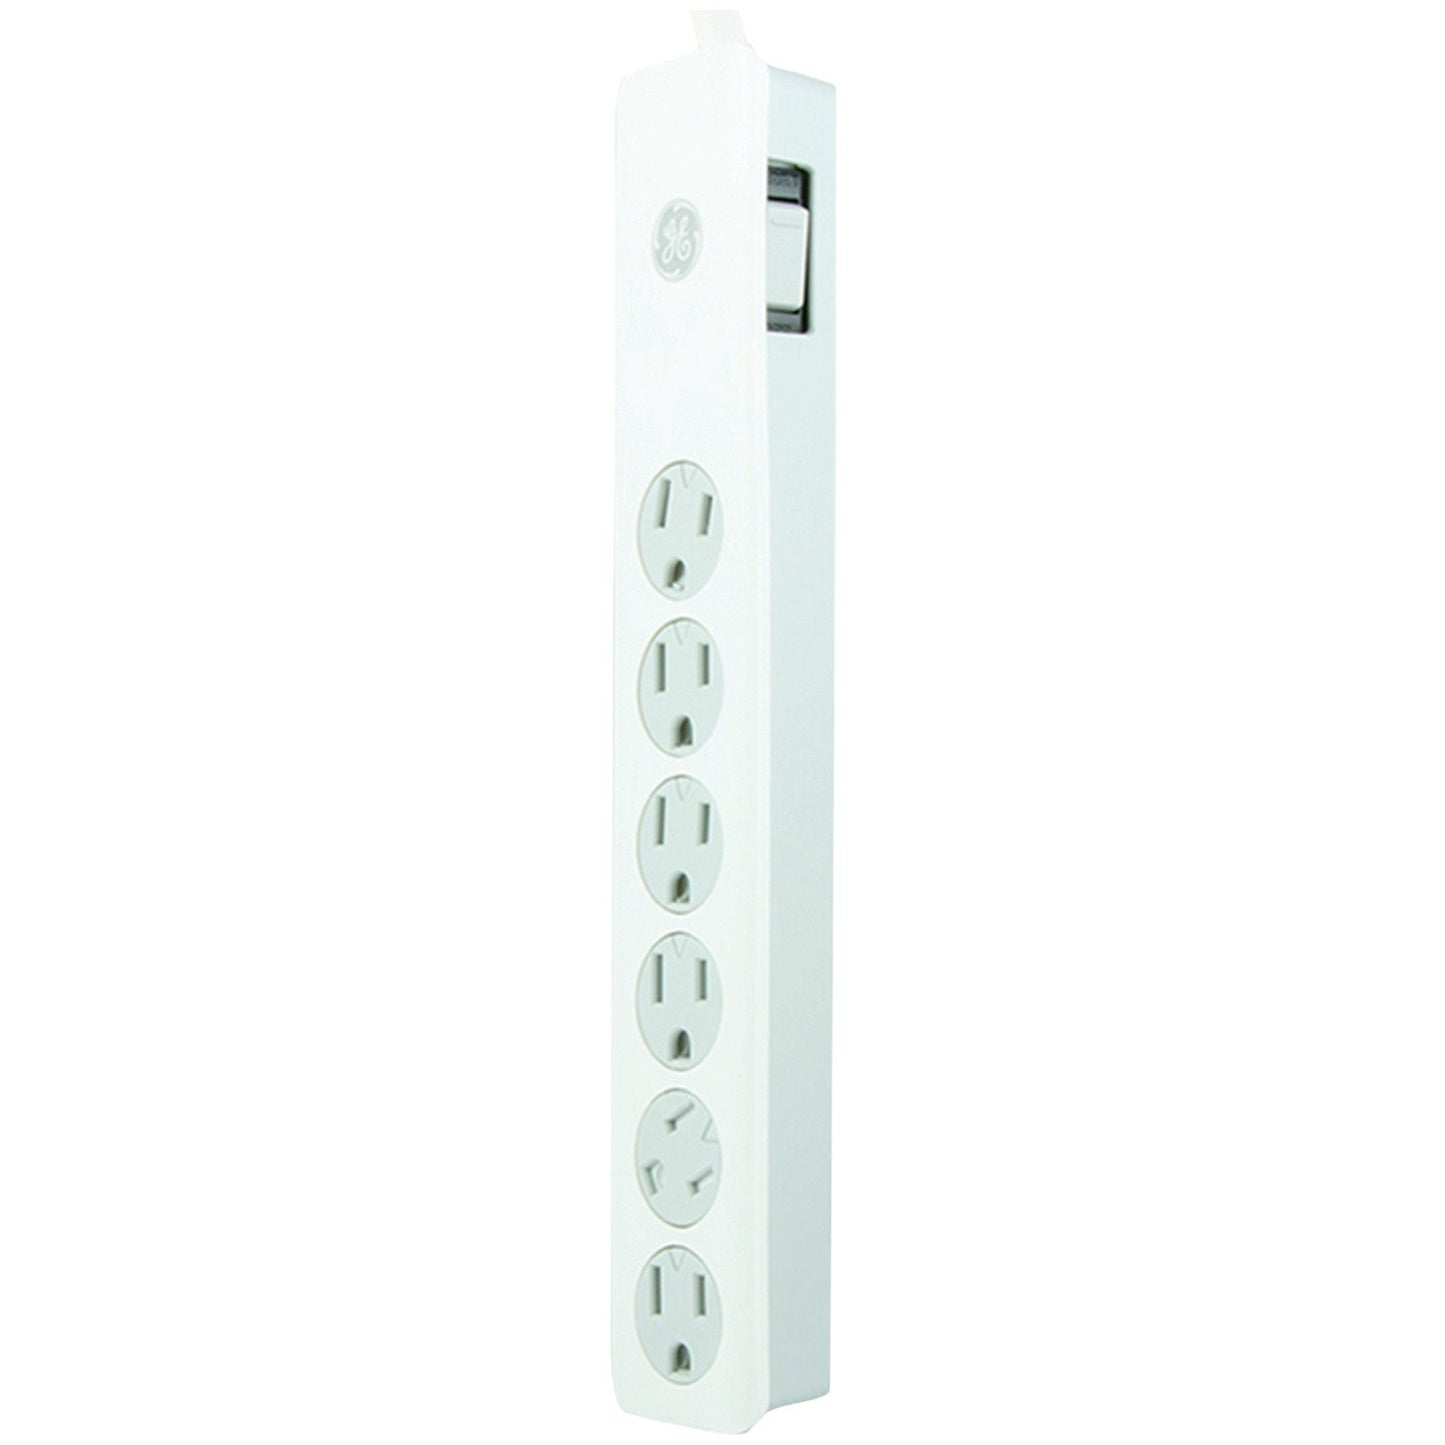 GE 14089 6-Outlet Surge Protector (3ft; White)